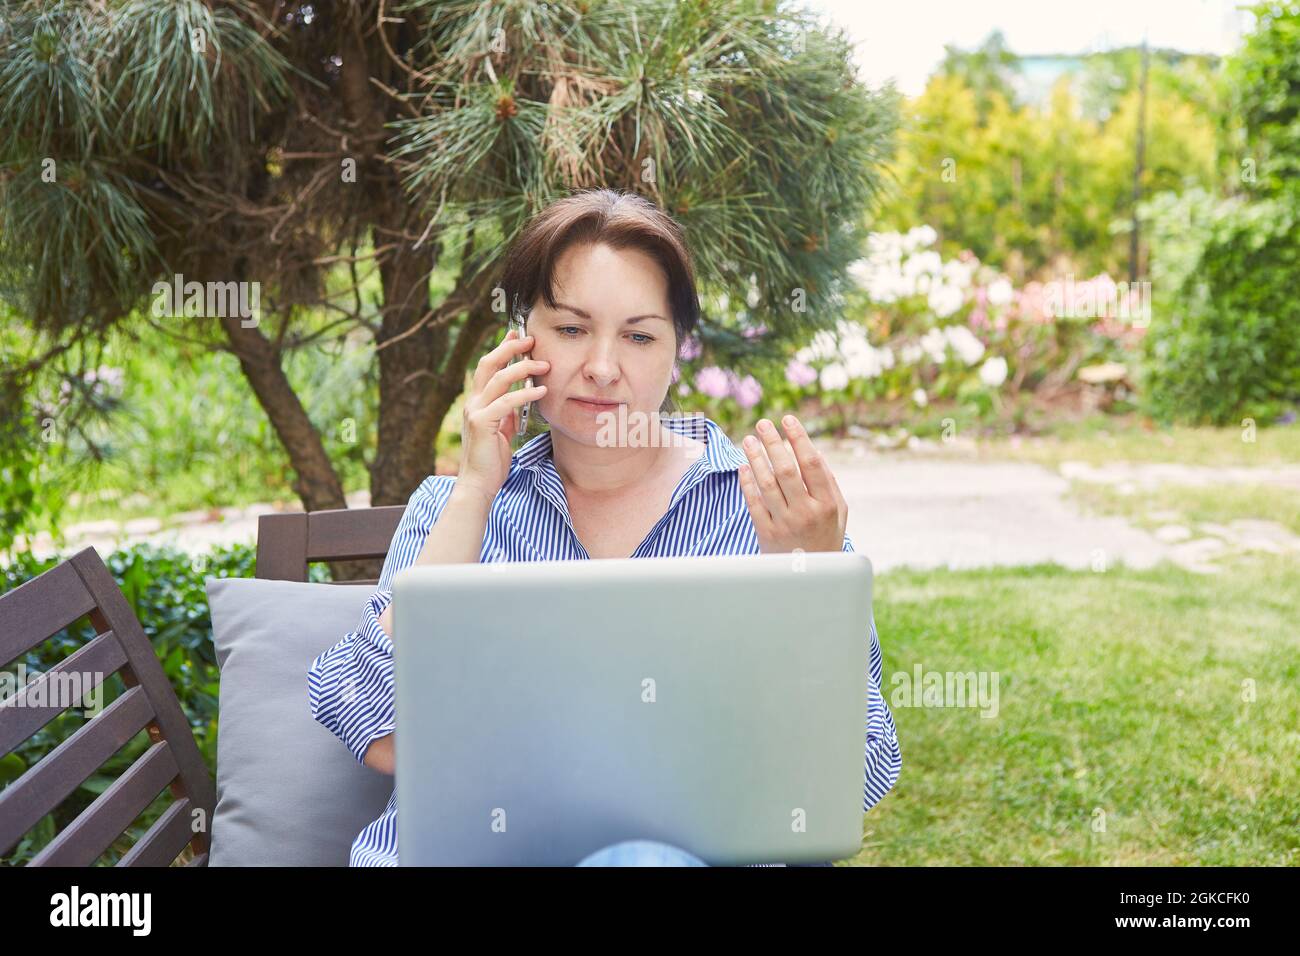 Business woman on laptop computer in green garden in summer making mobile phone call Stock Photo